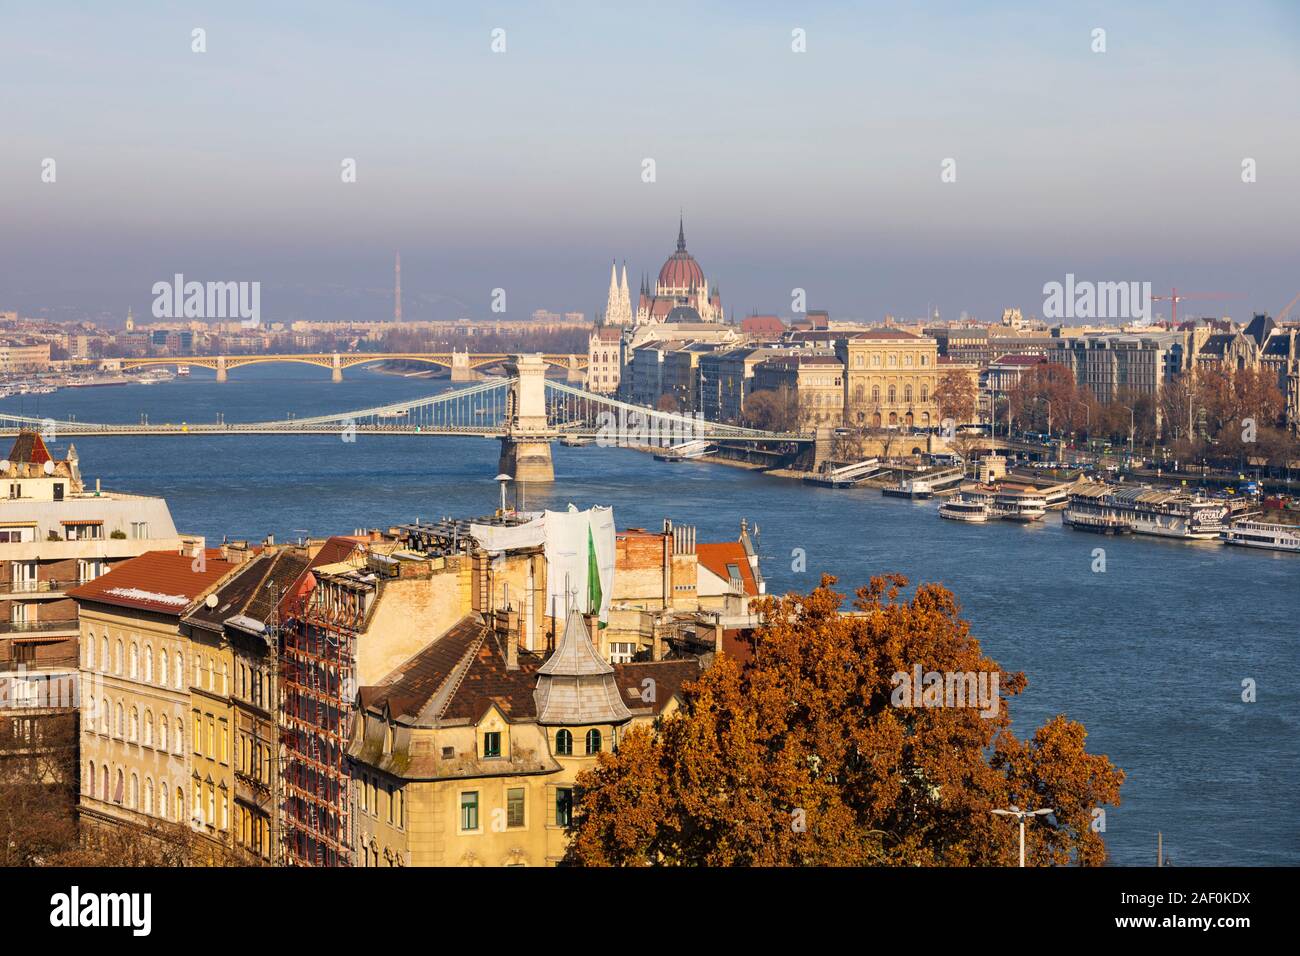 View across the River Danube to the Parliament Building and Chain Bridge. Winter in Budapest, Hungary. December 2019 Stock Photo